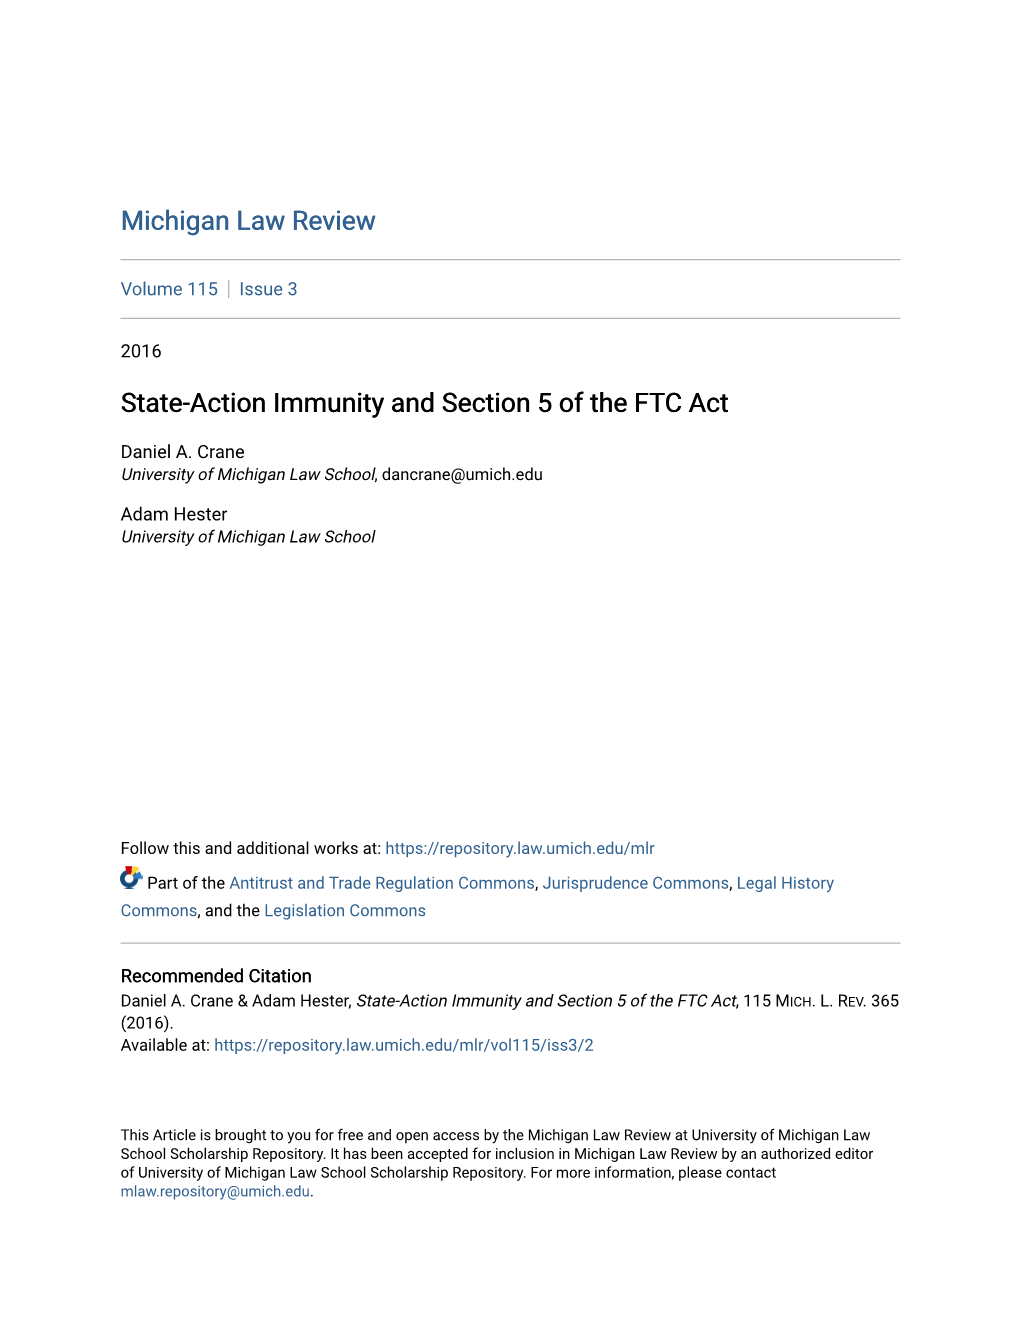 State-Action Immunity and Section 5 of the FTC Act